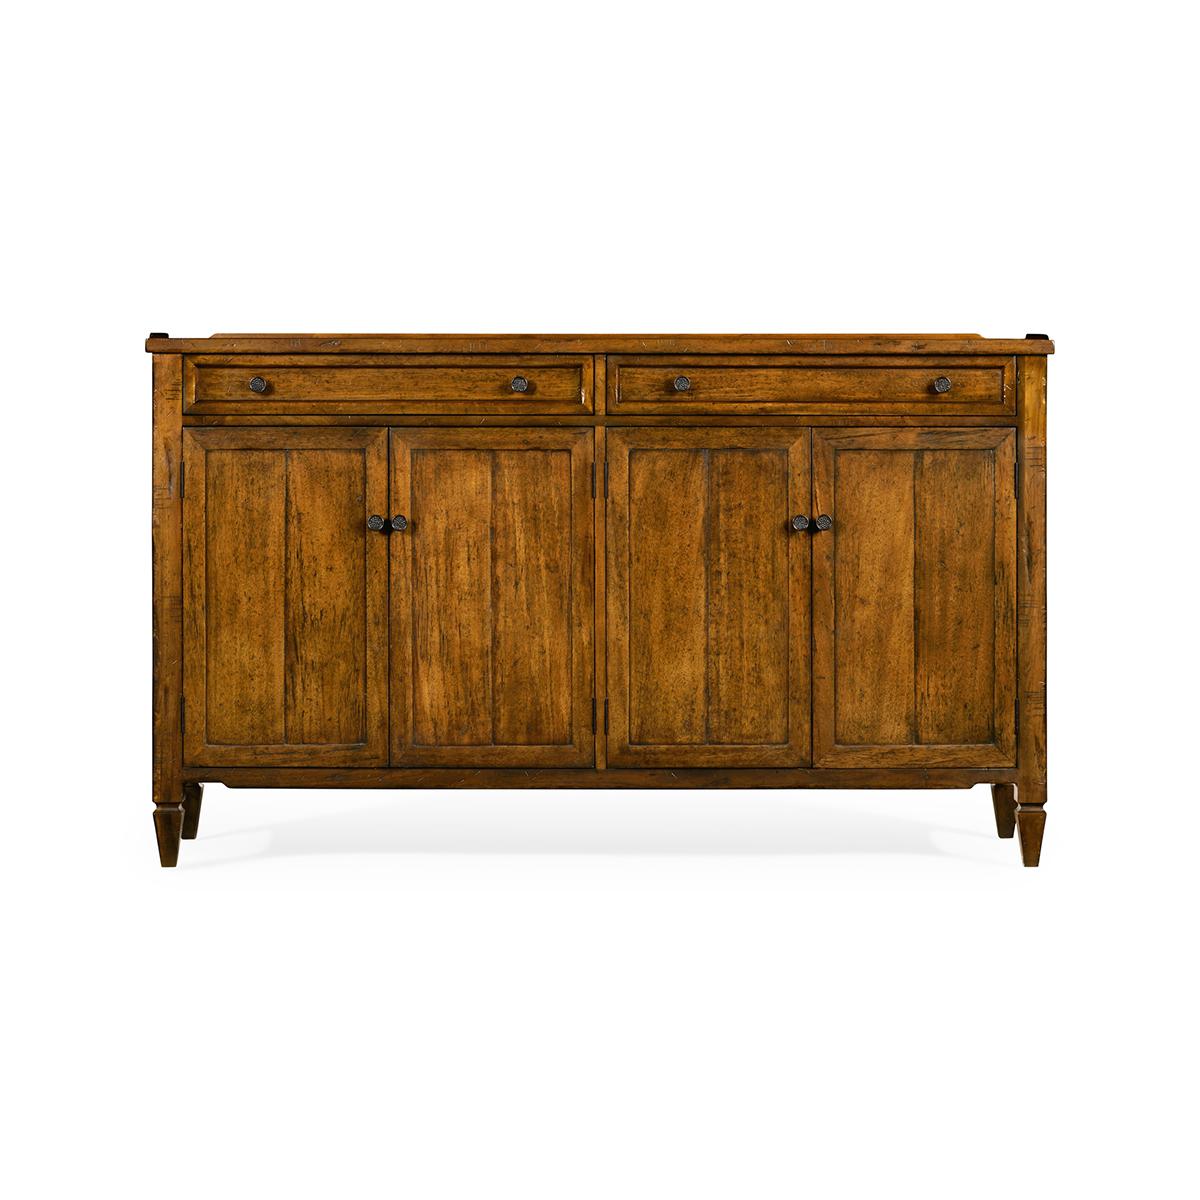 Rustic country walnut sideboard in a country-style finish, on a stepped pedestal base with four contemporary doors, two shallow drawers and an interior featuring two double cupboards with a single shelf.

Dimensions: 64